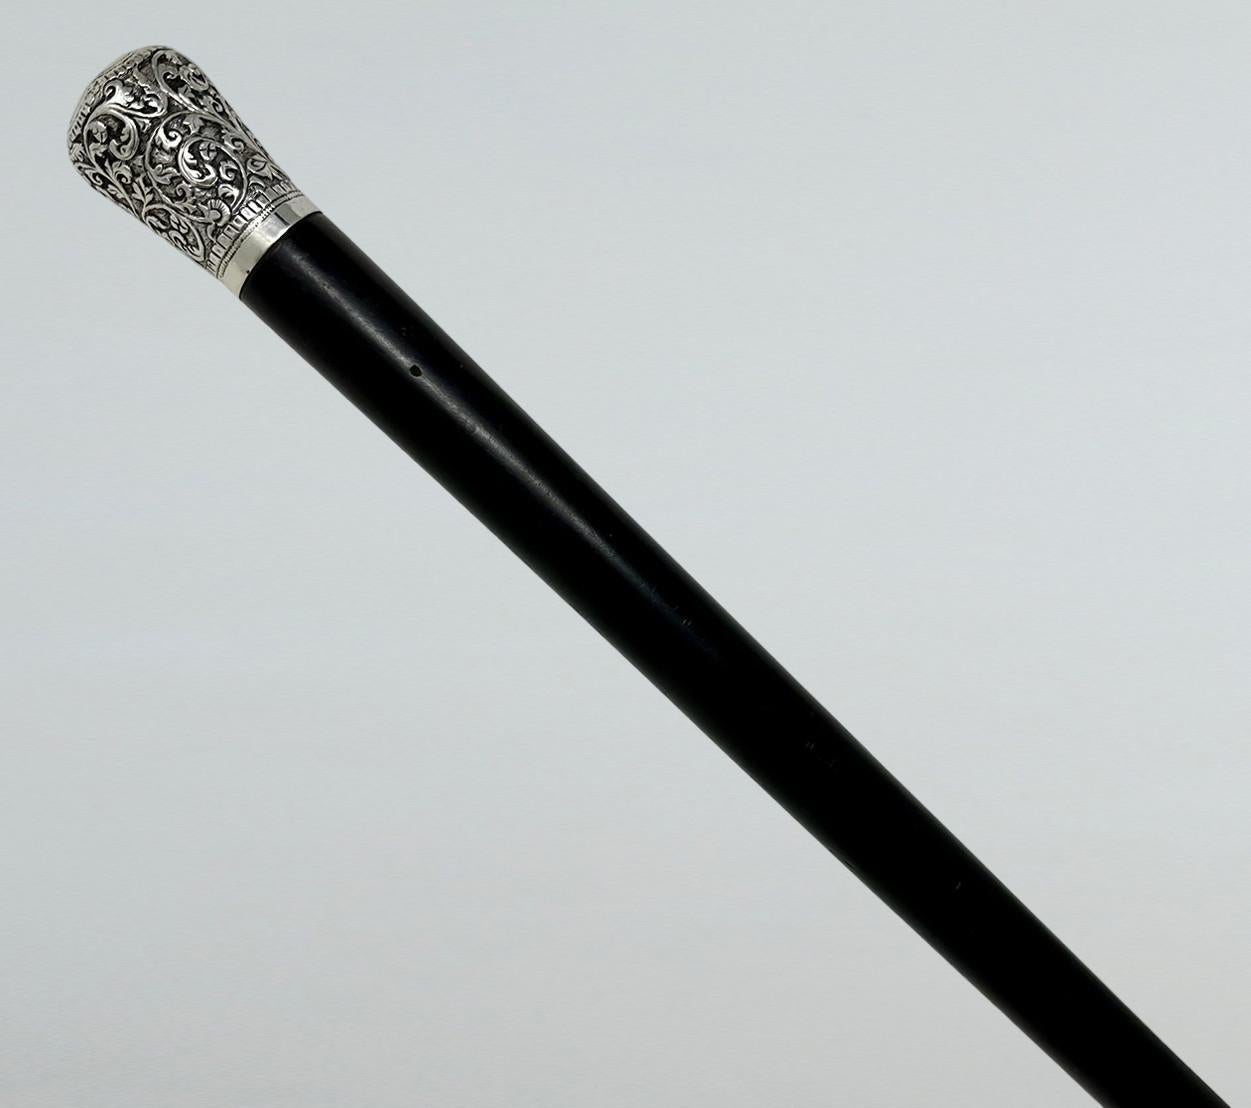 Fine Quality Chinese Polished Heavy Gauge Ebony Walking Cane Stick with Highly Decorative Embossed Silver Grip, made in China during the last quarter of the Nineteenth Century.  

The circular silver beautifully embossed knopped silver grip above a